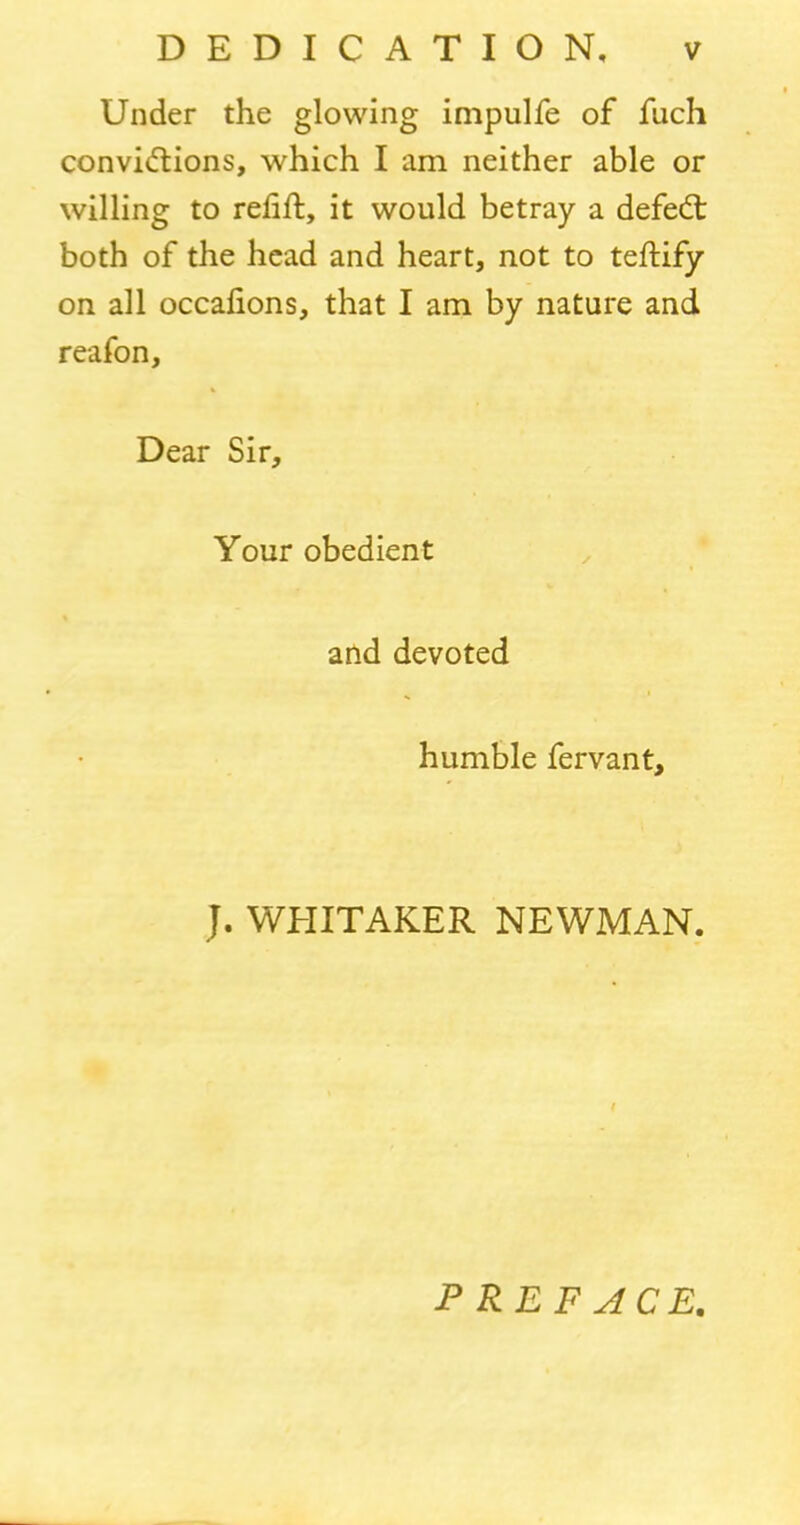 Under the glowing impulfe of fuch convictions, which I am neither able or willing to refill, it would betray a defedt both of the head and heart, not to teftify on all occafions, that I am by nature and reafon, Dear Sir, Your obedient and devoted humble fervant. J. WHITAKER NEWMAN. PREFACE.